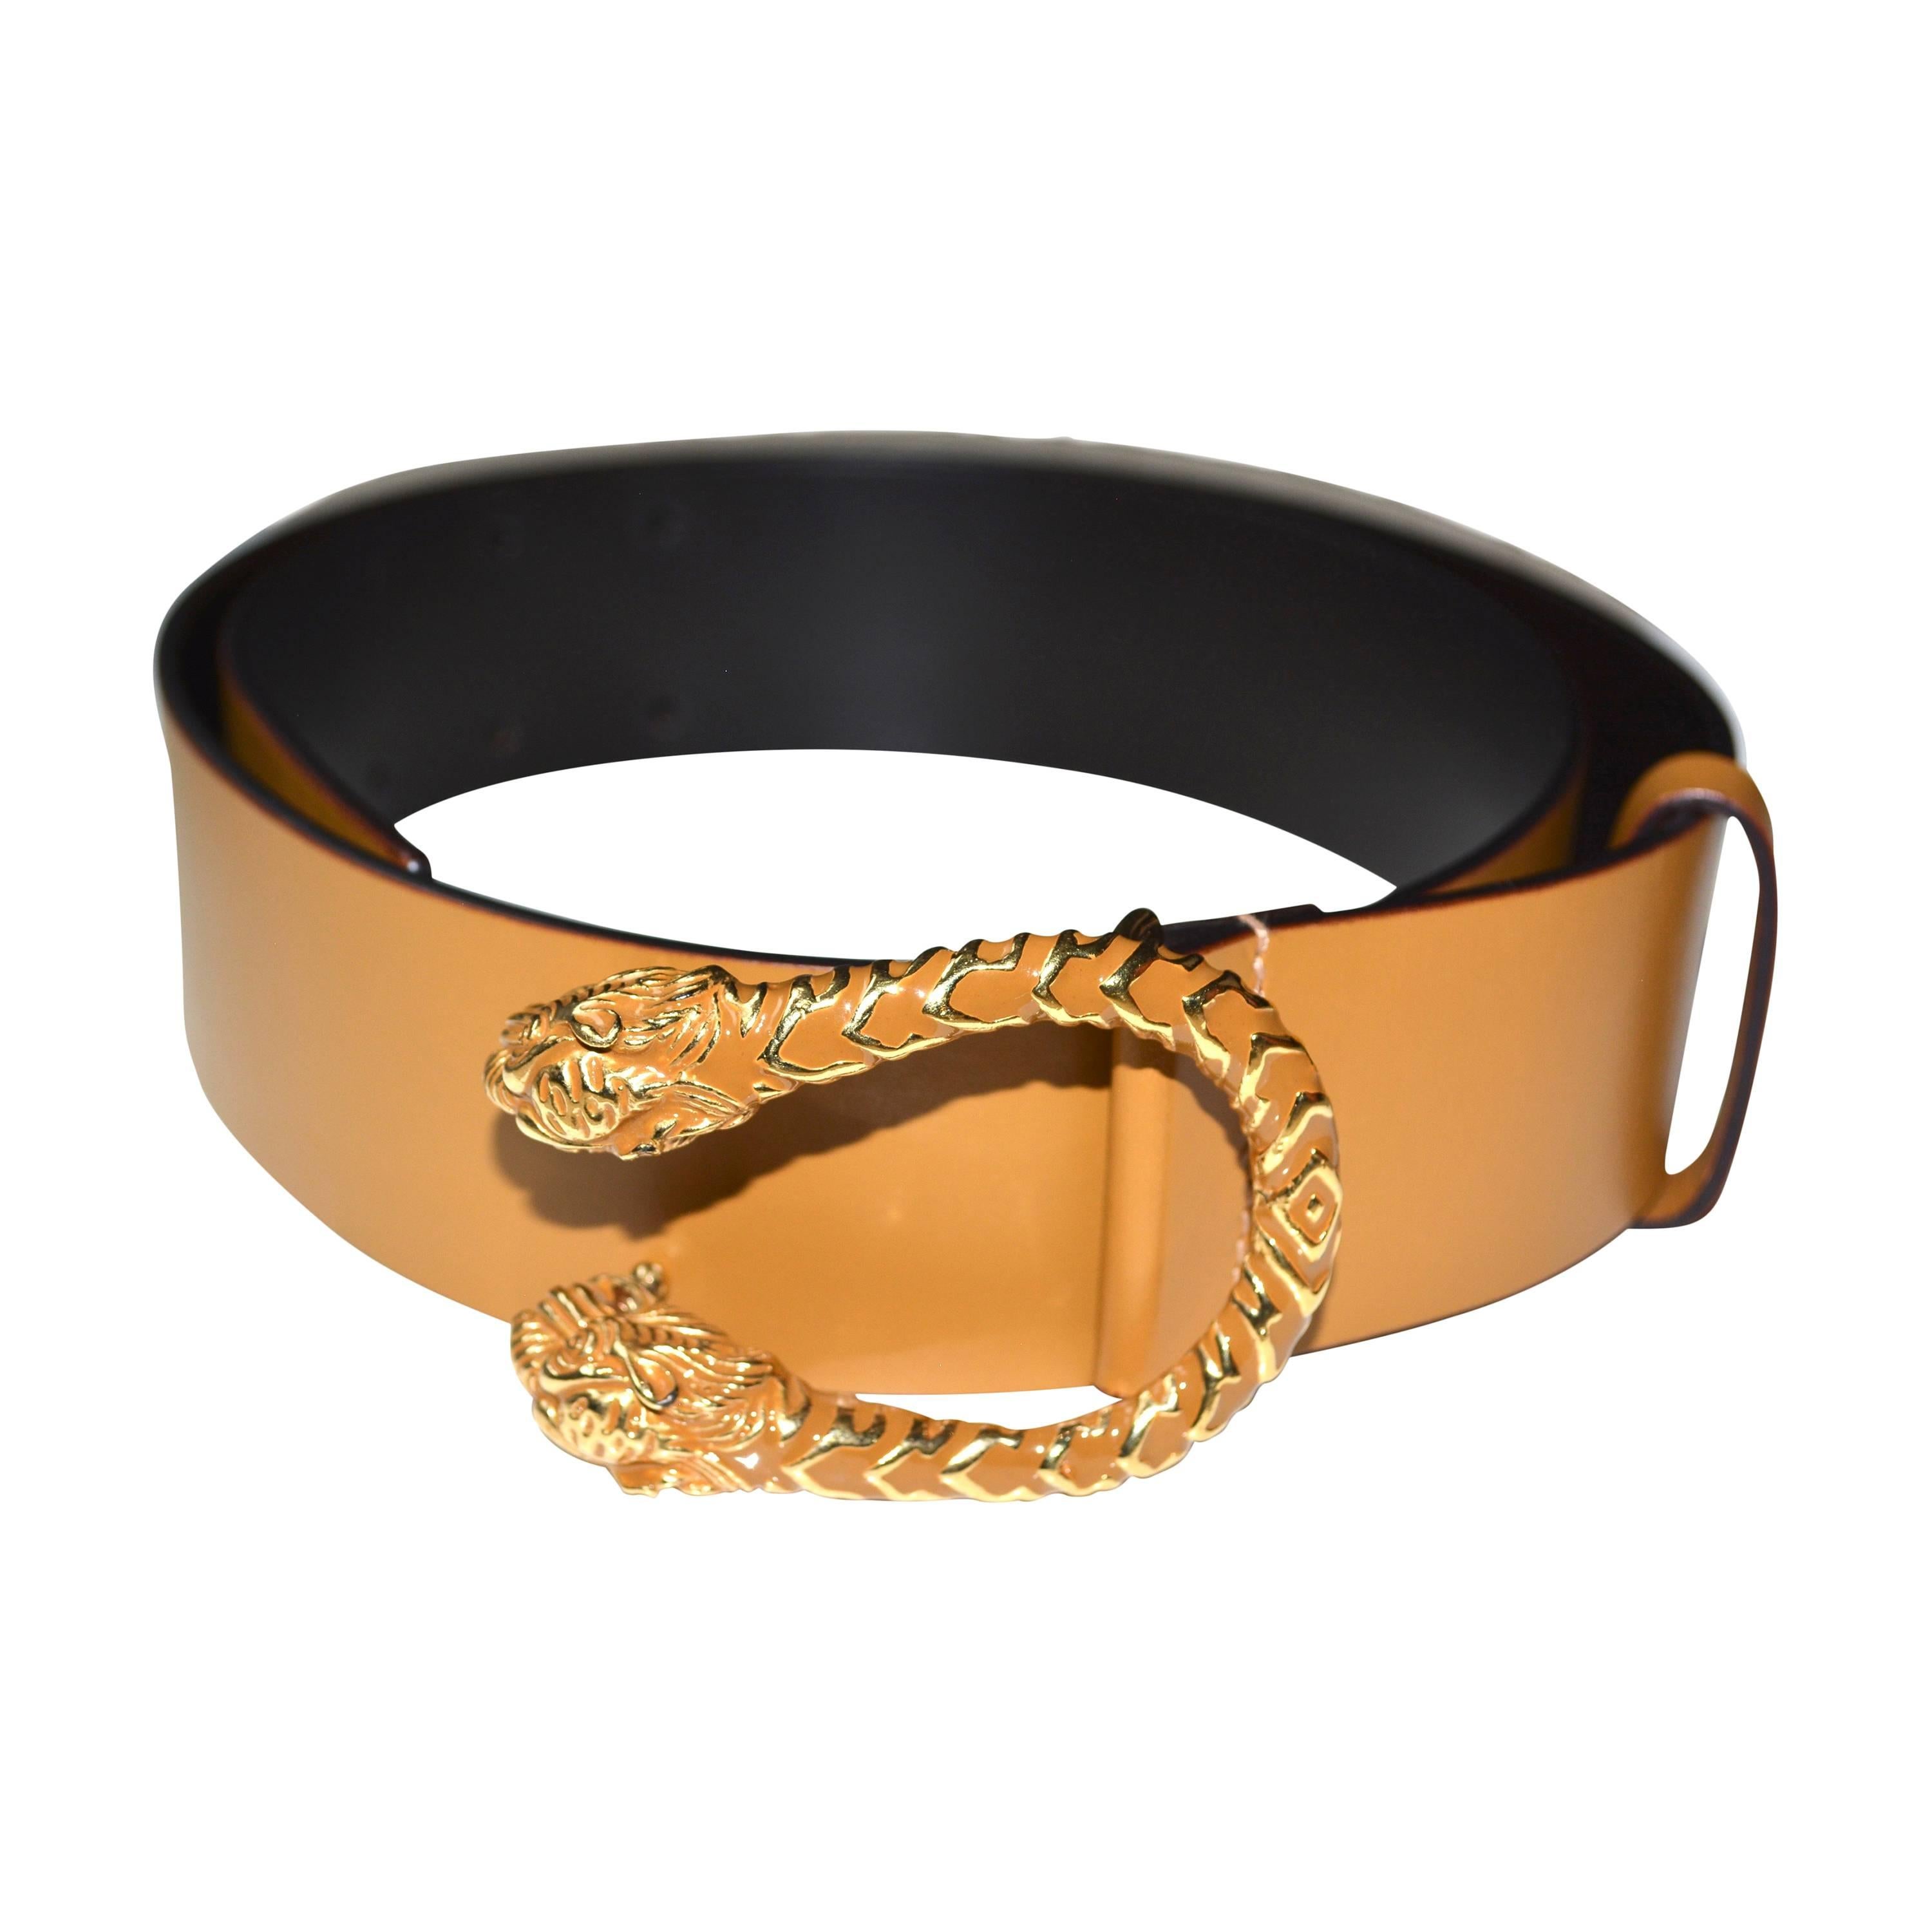 Gucci Leather Double Tiger Belt, Tom Ford Era